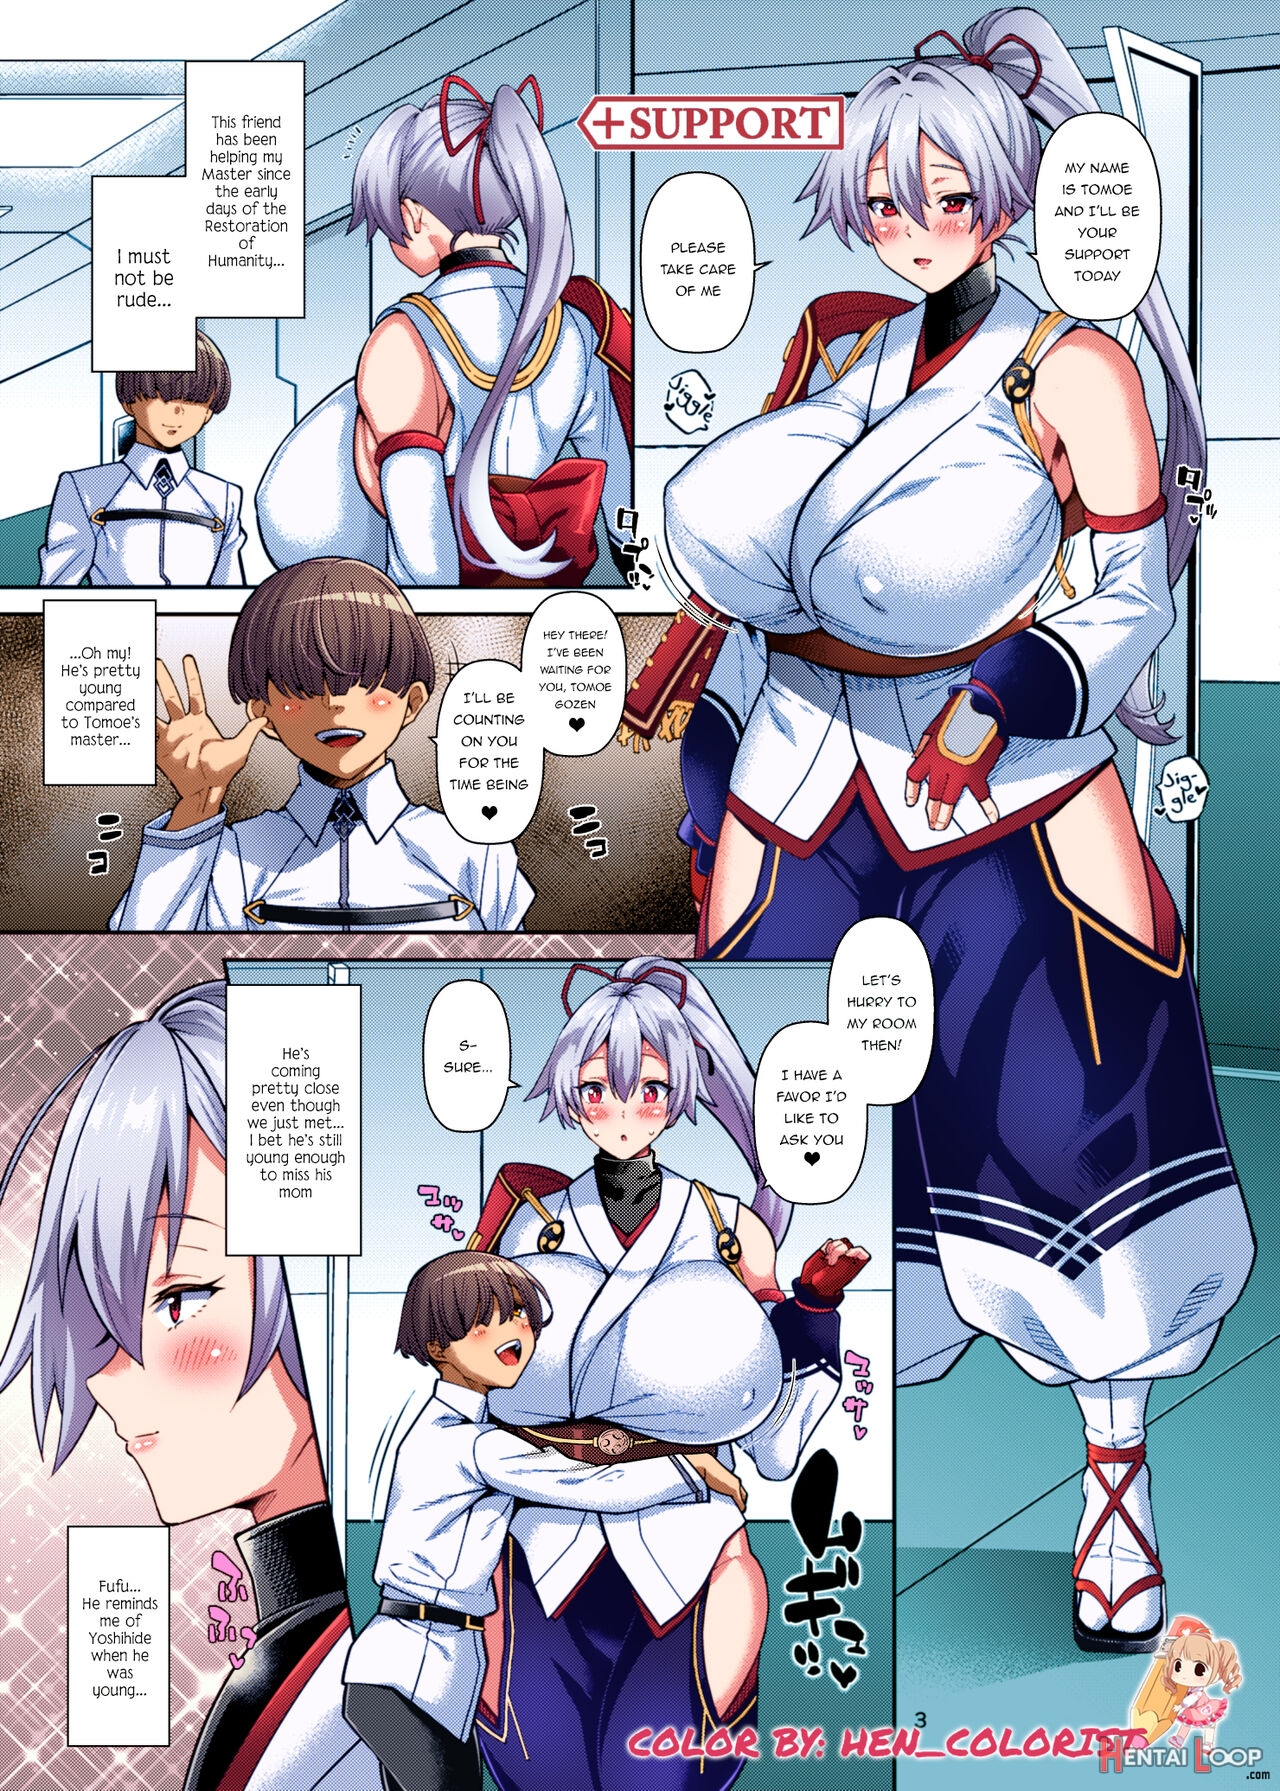 Sex Support Zupposhi Gozen - Colorized page 2